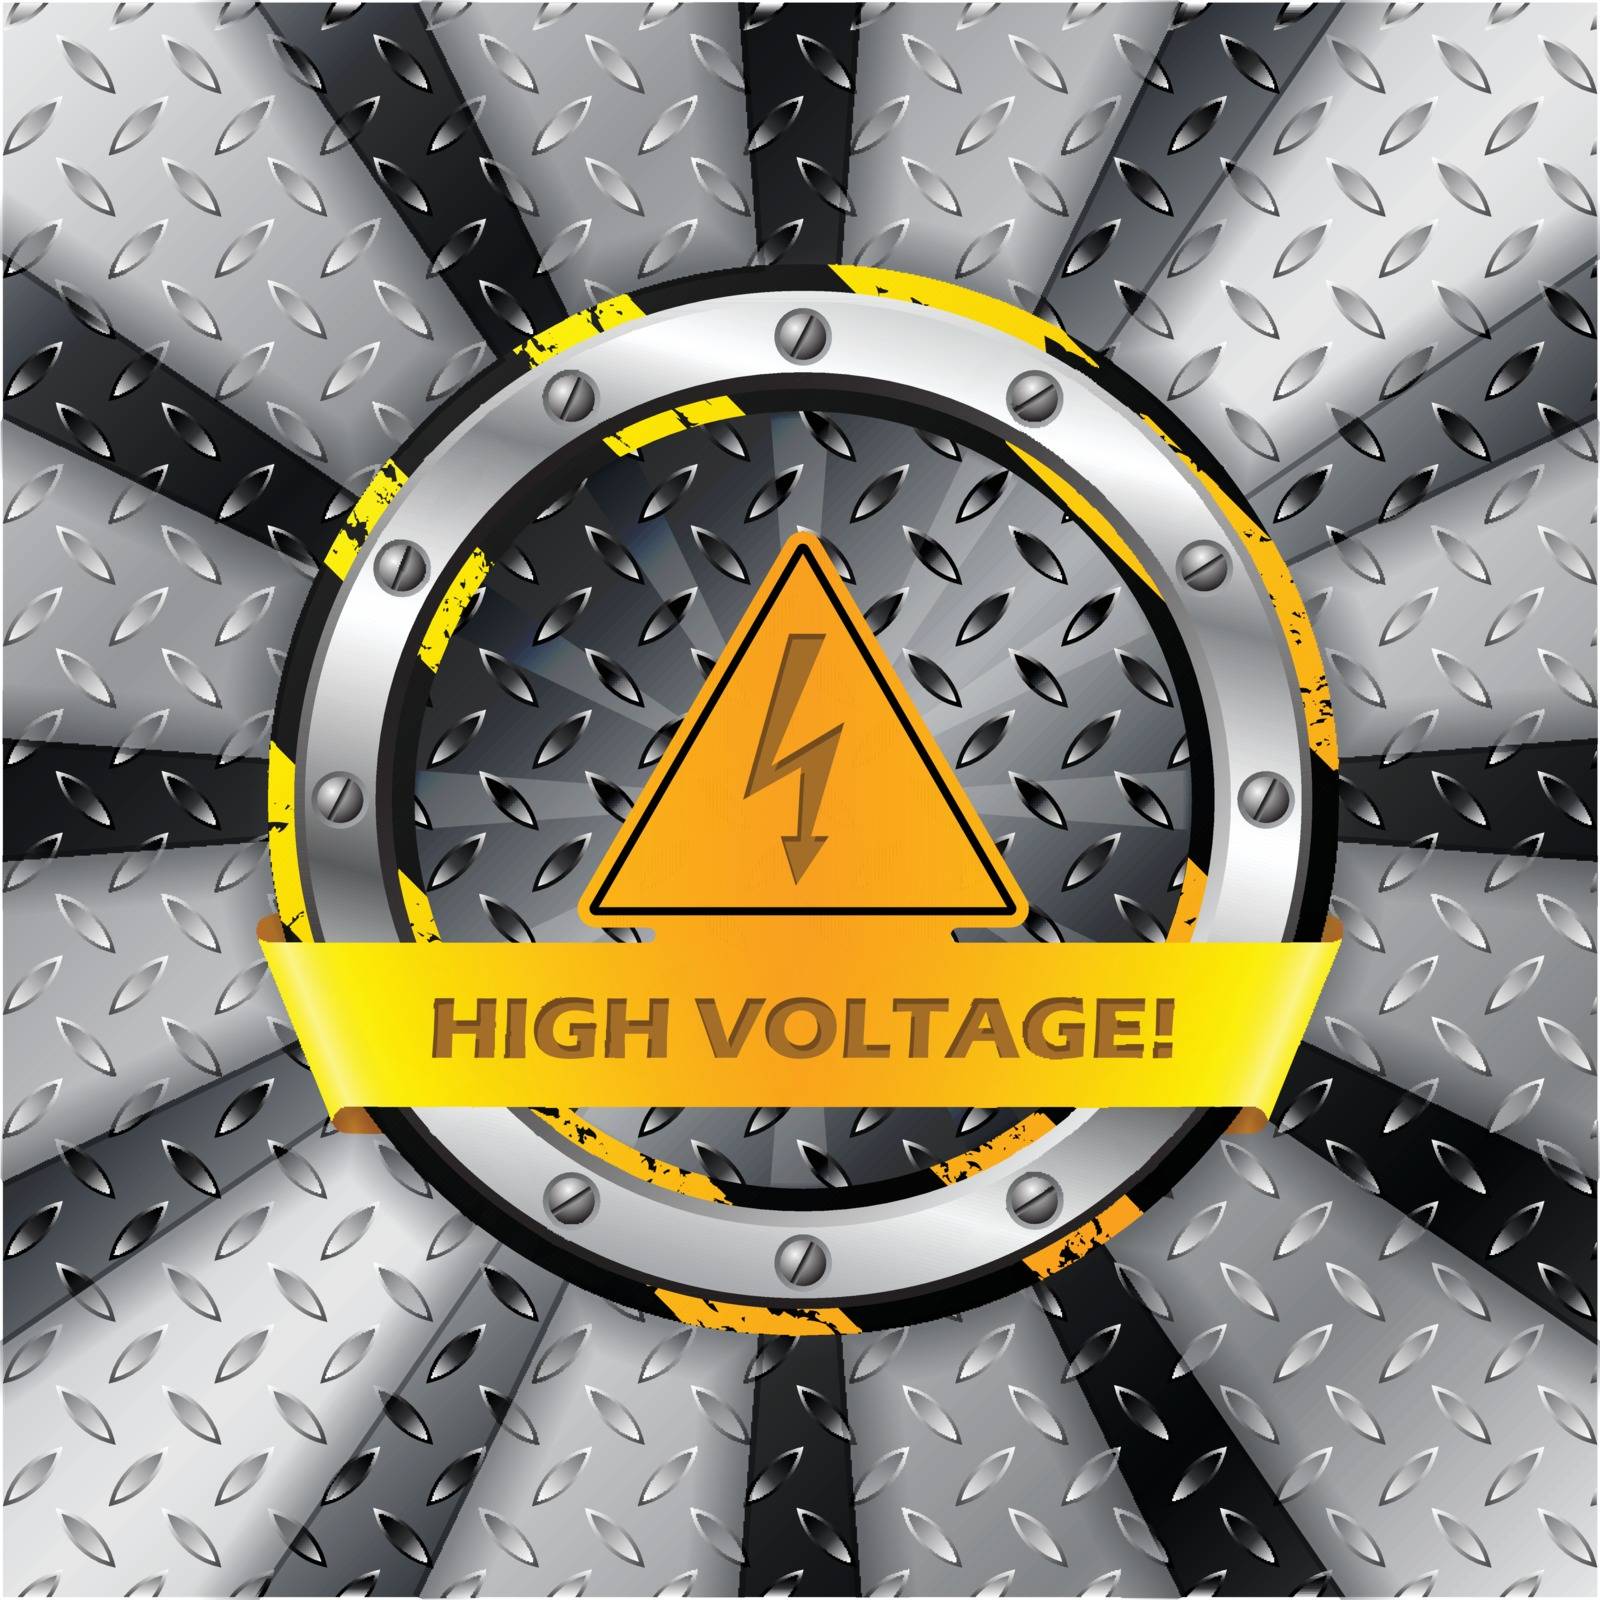 High voltage warning sign by vipervxw